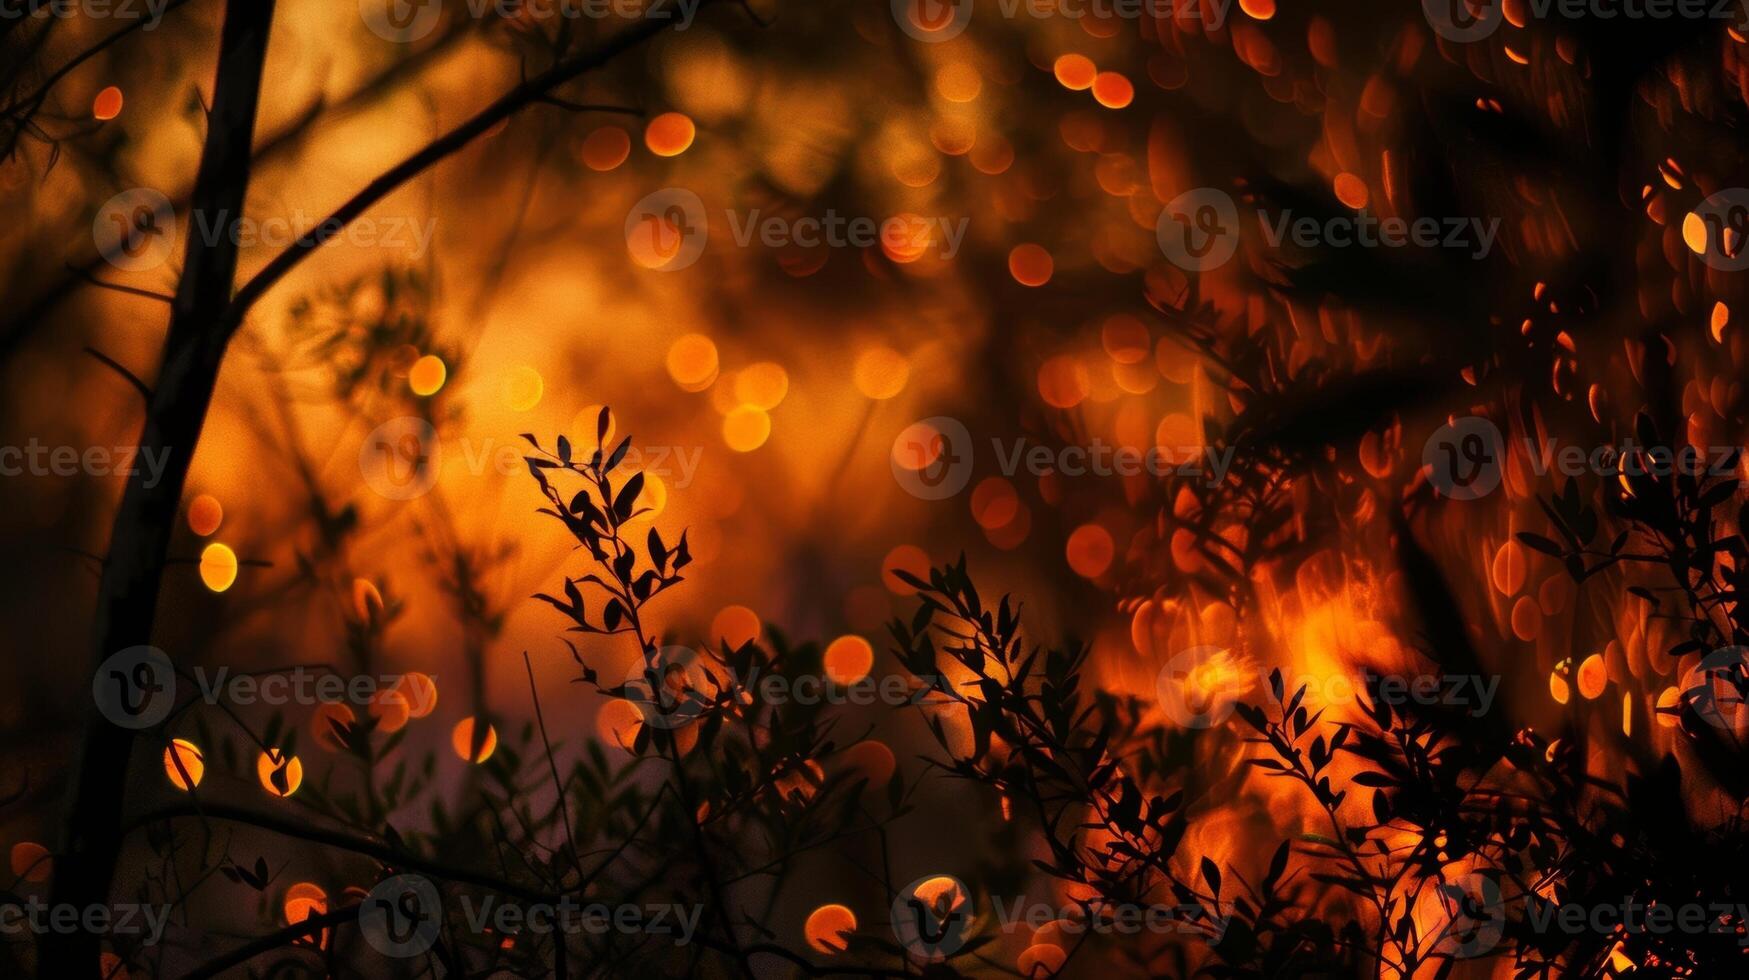 The surrounding trees are silhouetted against the orange glow of the fire creating a picturesque backdrop. 2d flat cartoon photo